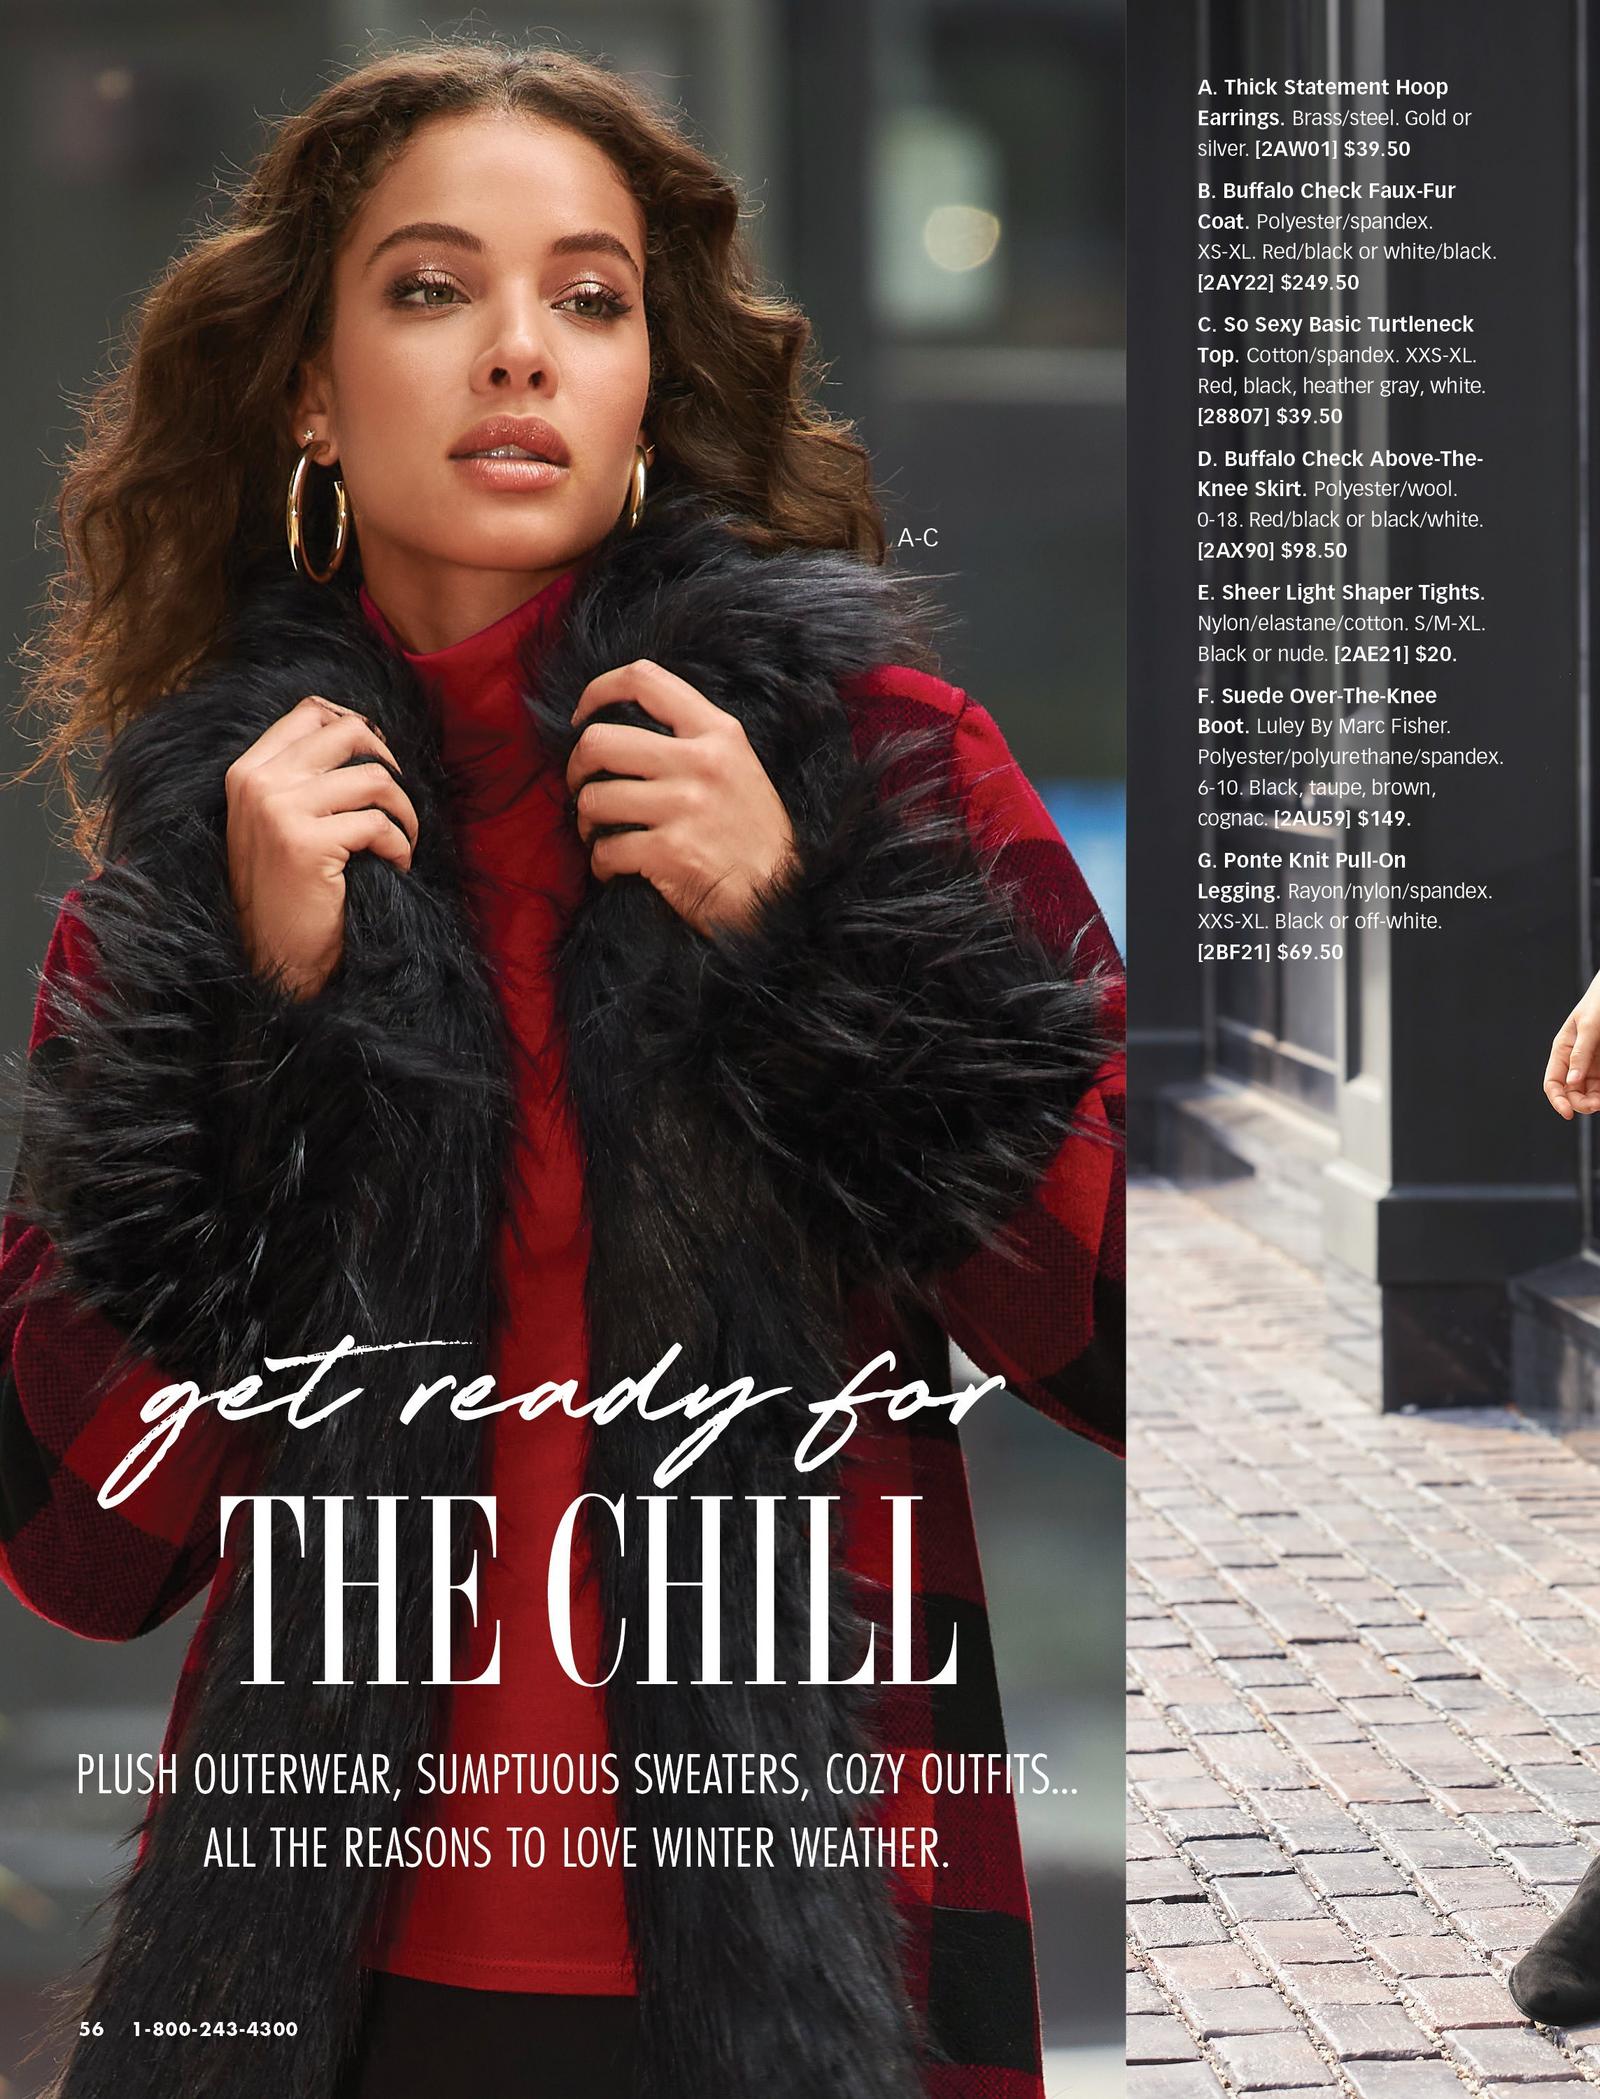 model wearing a red buffalo check faux-fur coat and red turtleneck top.